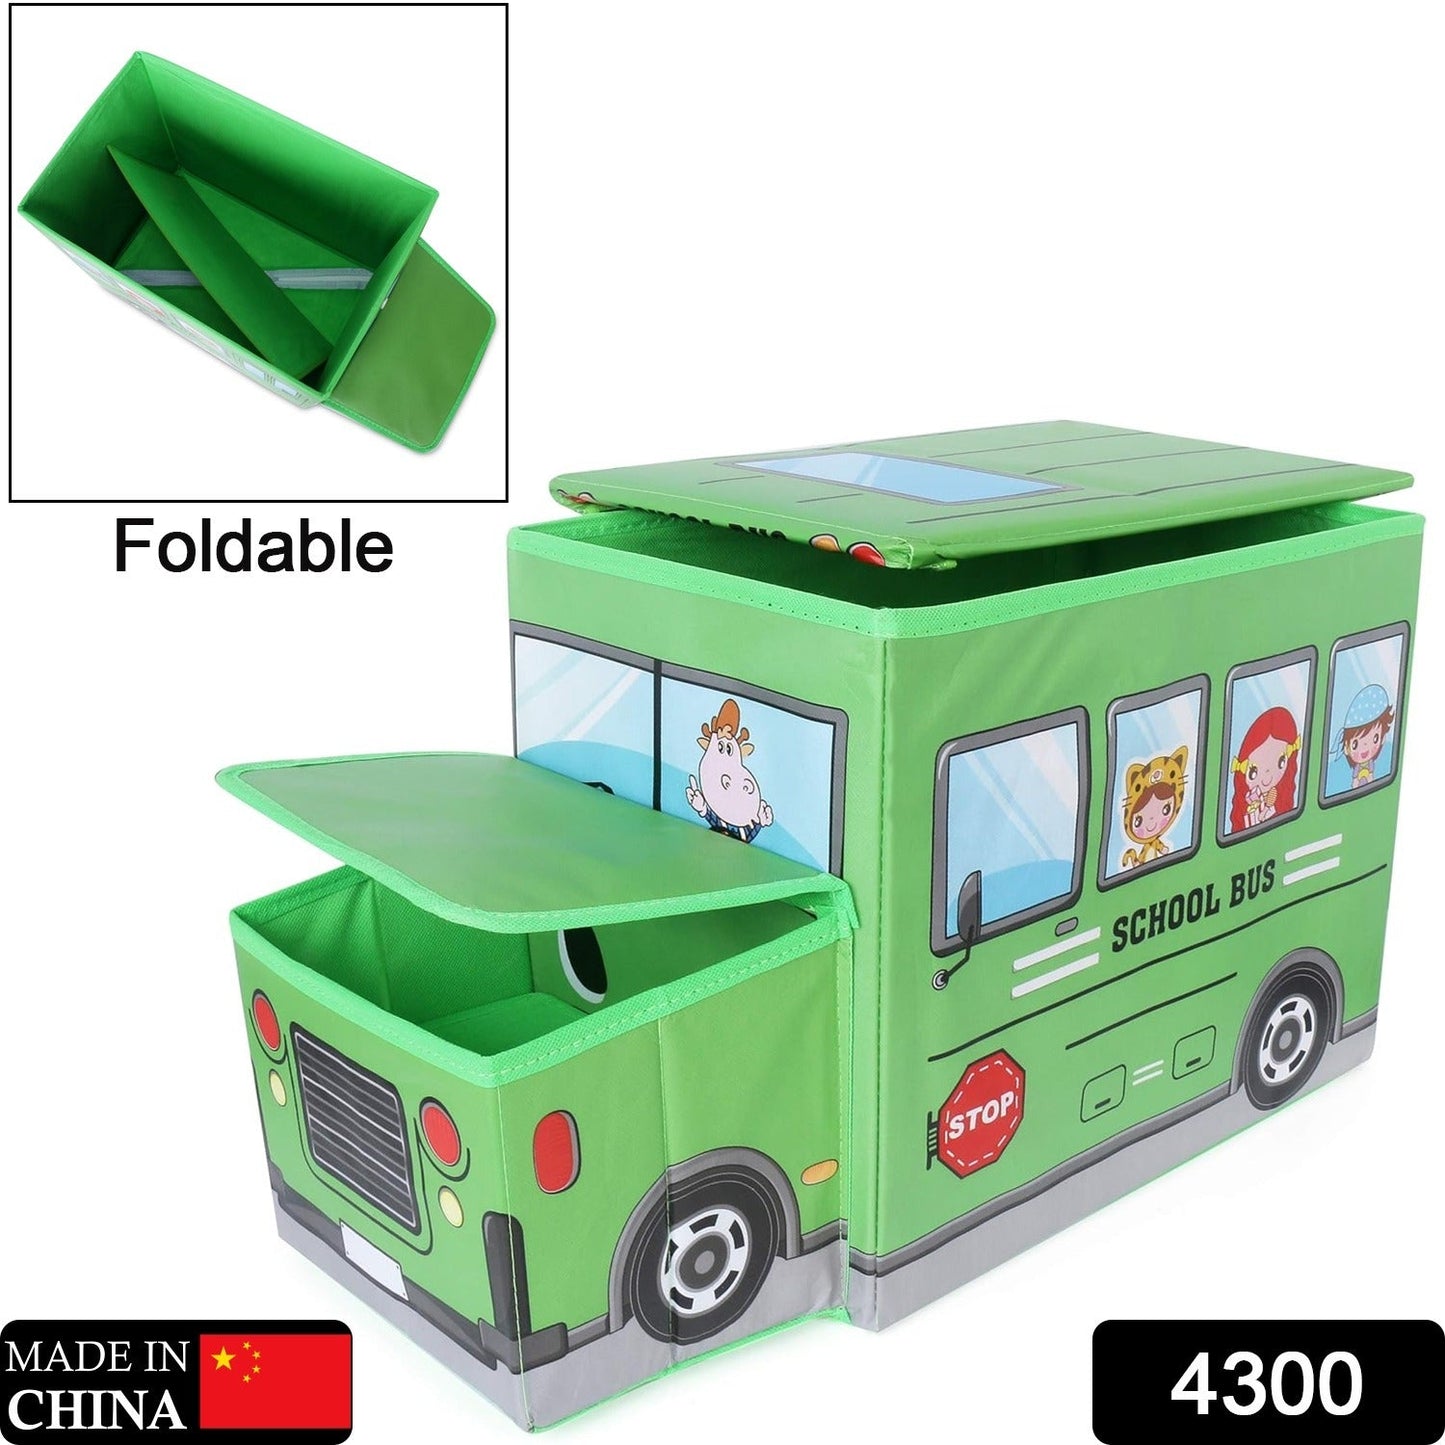 Foldable Bus Shape Toy Box Storage With Lid For Storage Of Toys Basket Useful As Toy Organizer Mountable Racks Surface Multipurpose Basket For Kids Wardrobe Cabinet Wood With Cloth Cover For Home Decor Books, Game, Baby Cloth (Mix Color & Design )